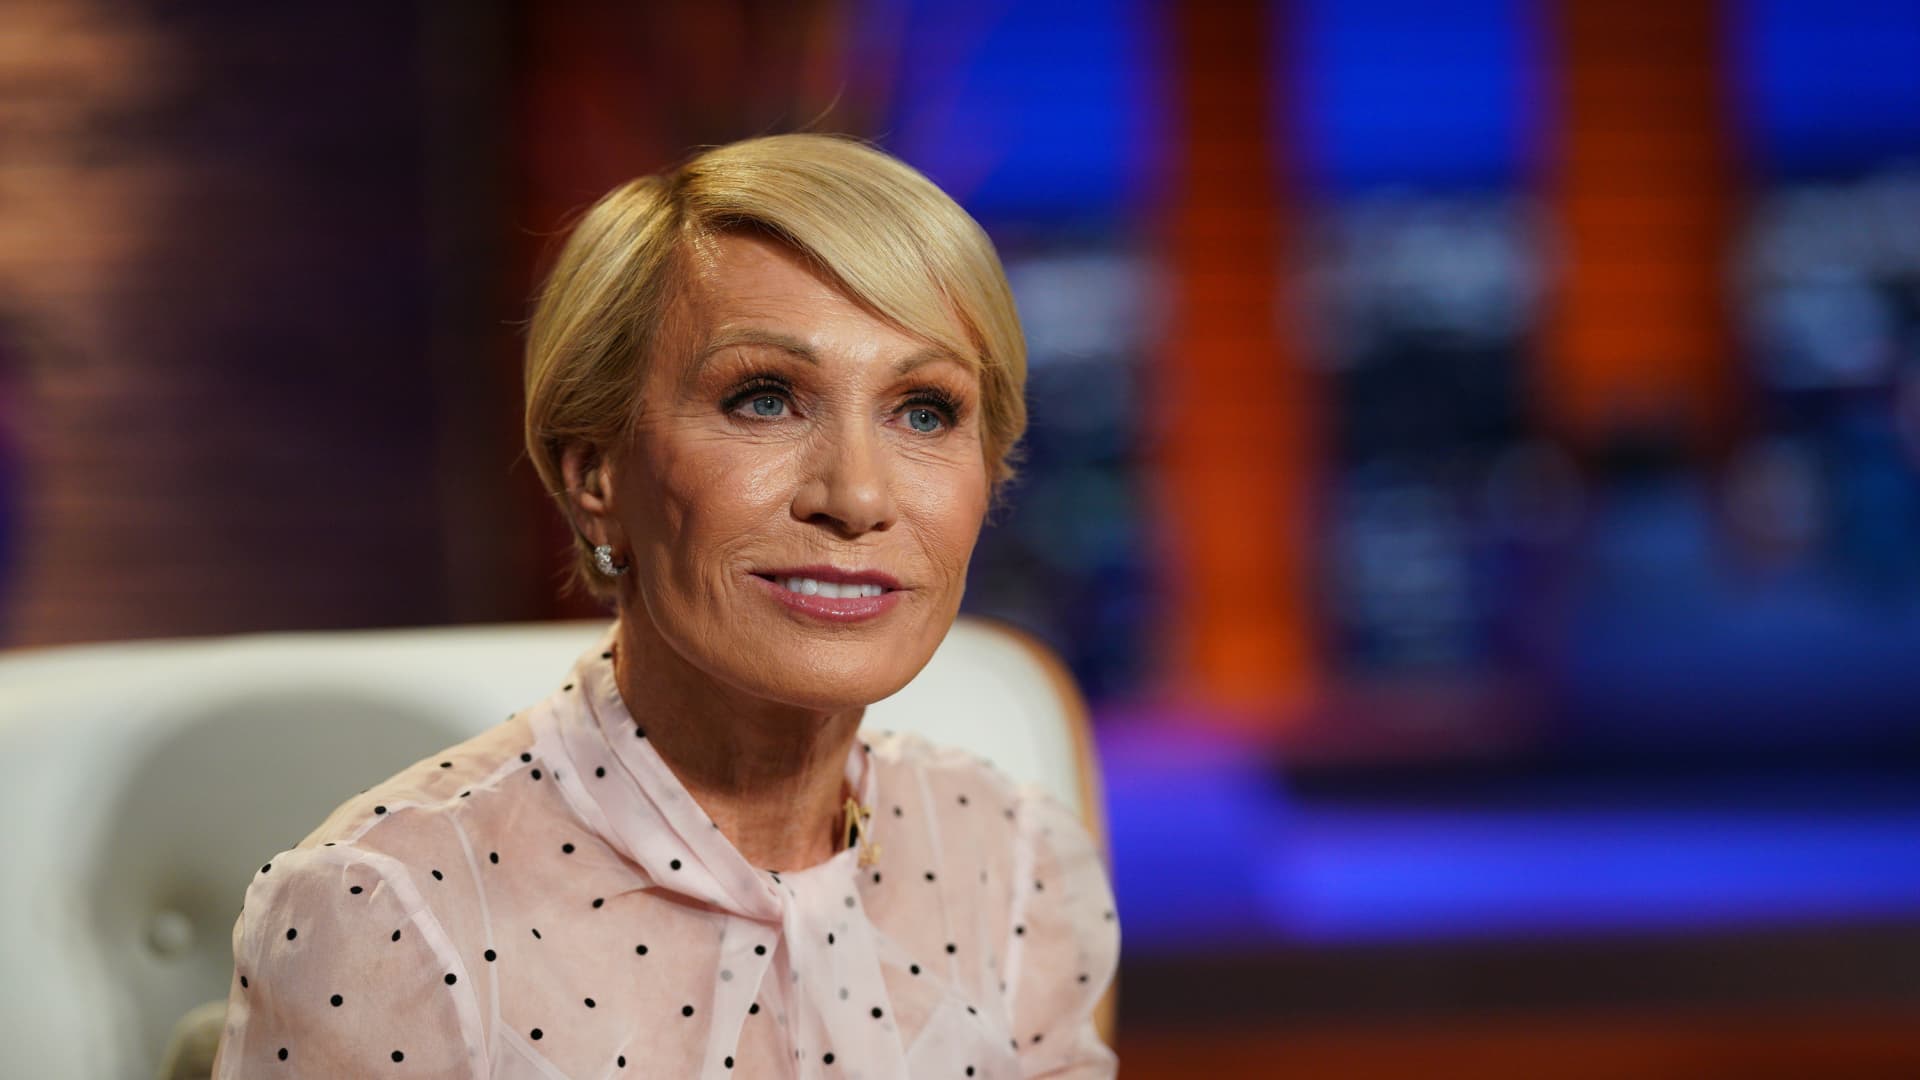 barbara corcoran, lauren simmons and other powerful women in business on their best advice and secrets to success